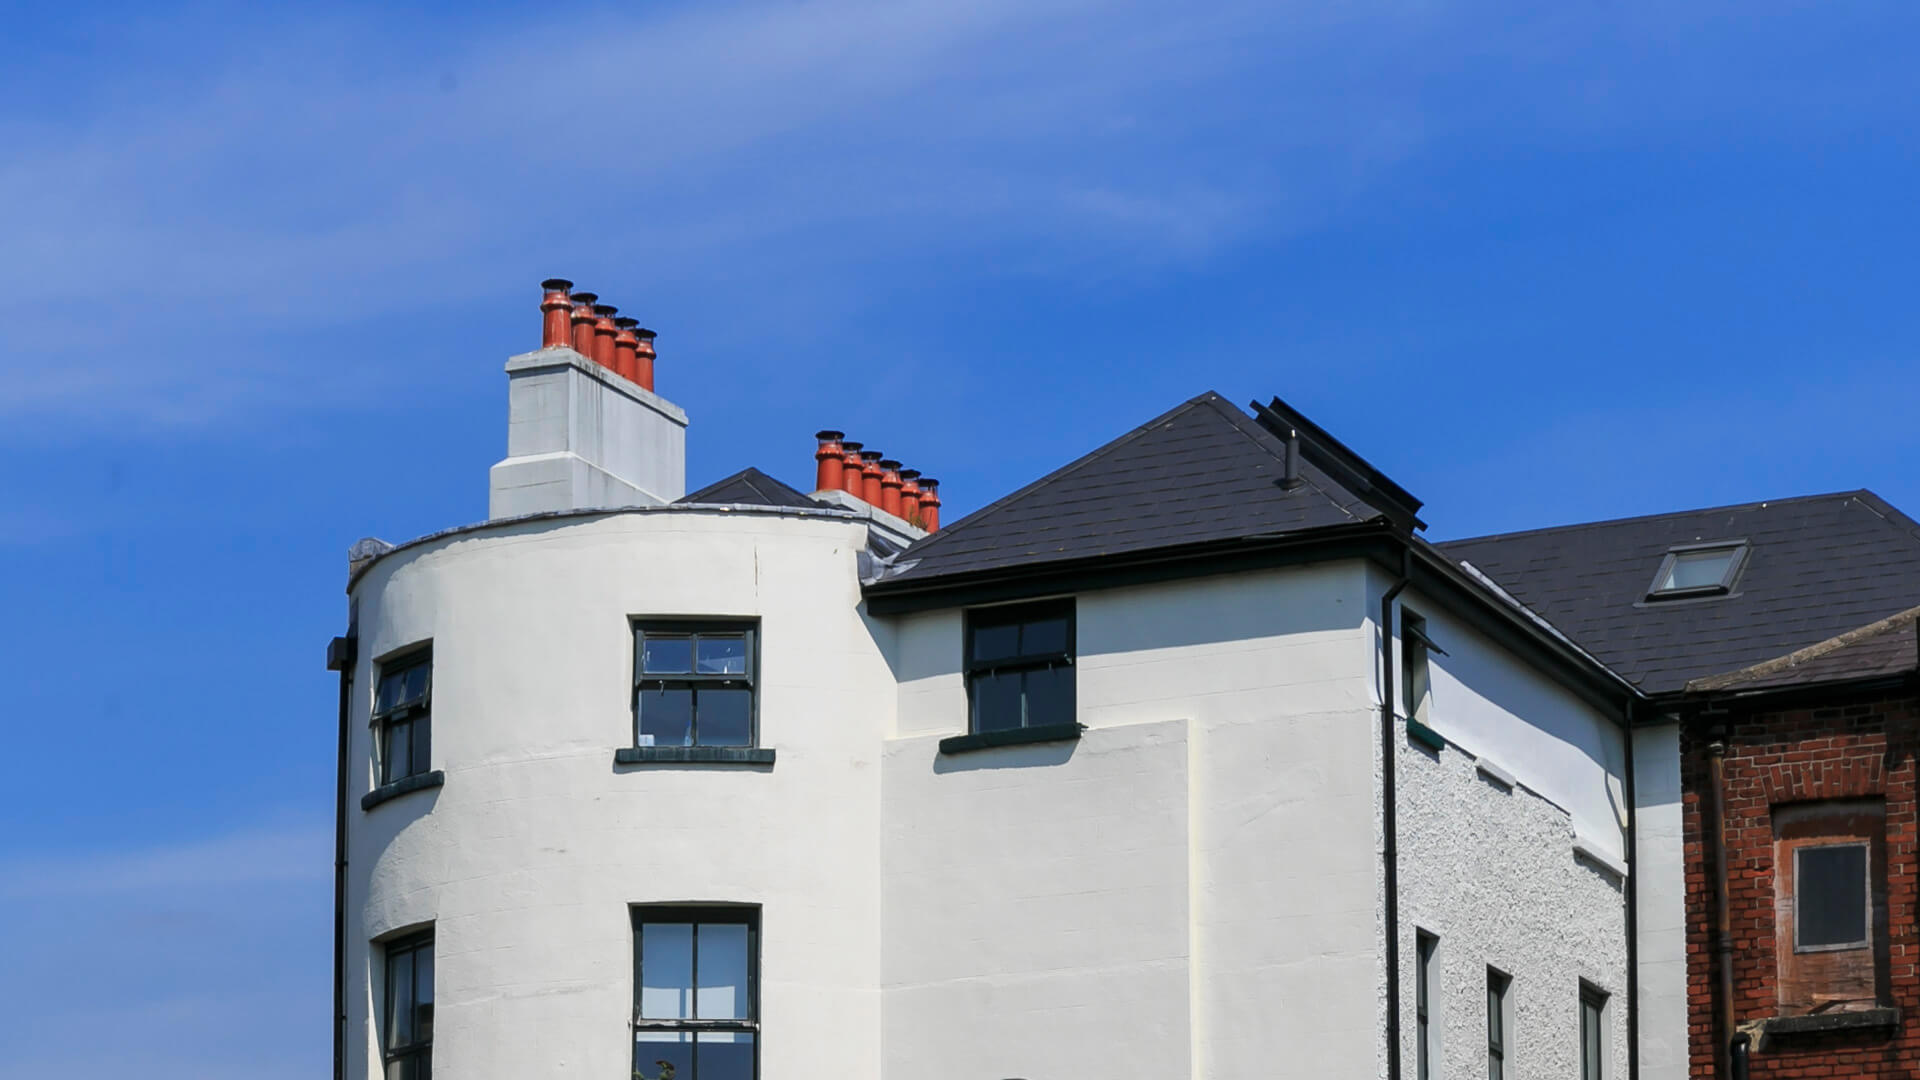 The upper portion of the Townhouse Twenty2 exterior showing orange chimney stacks against a blue sky